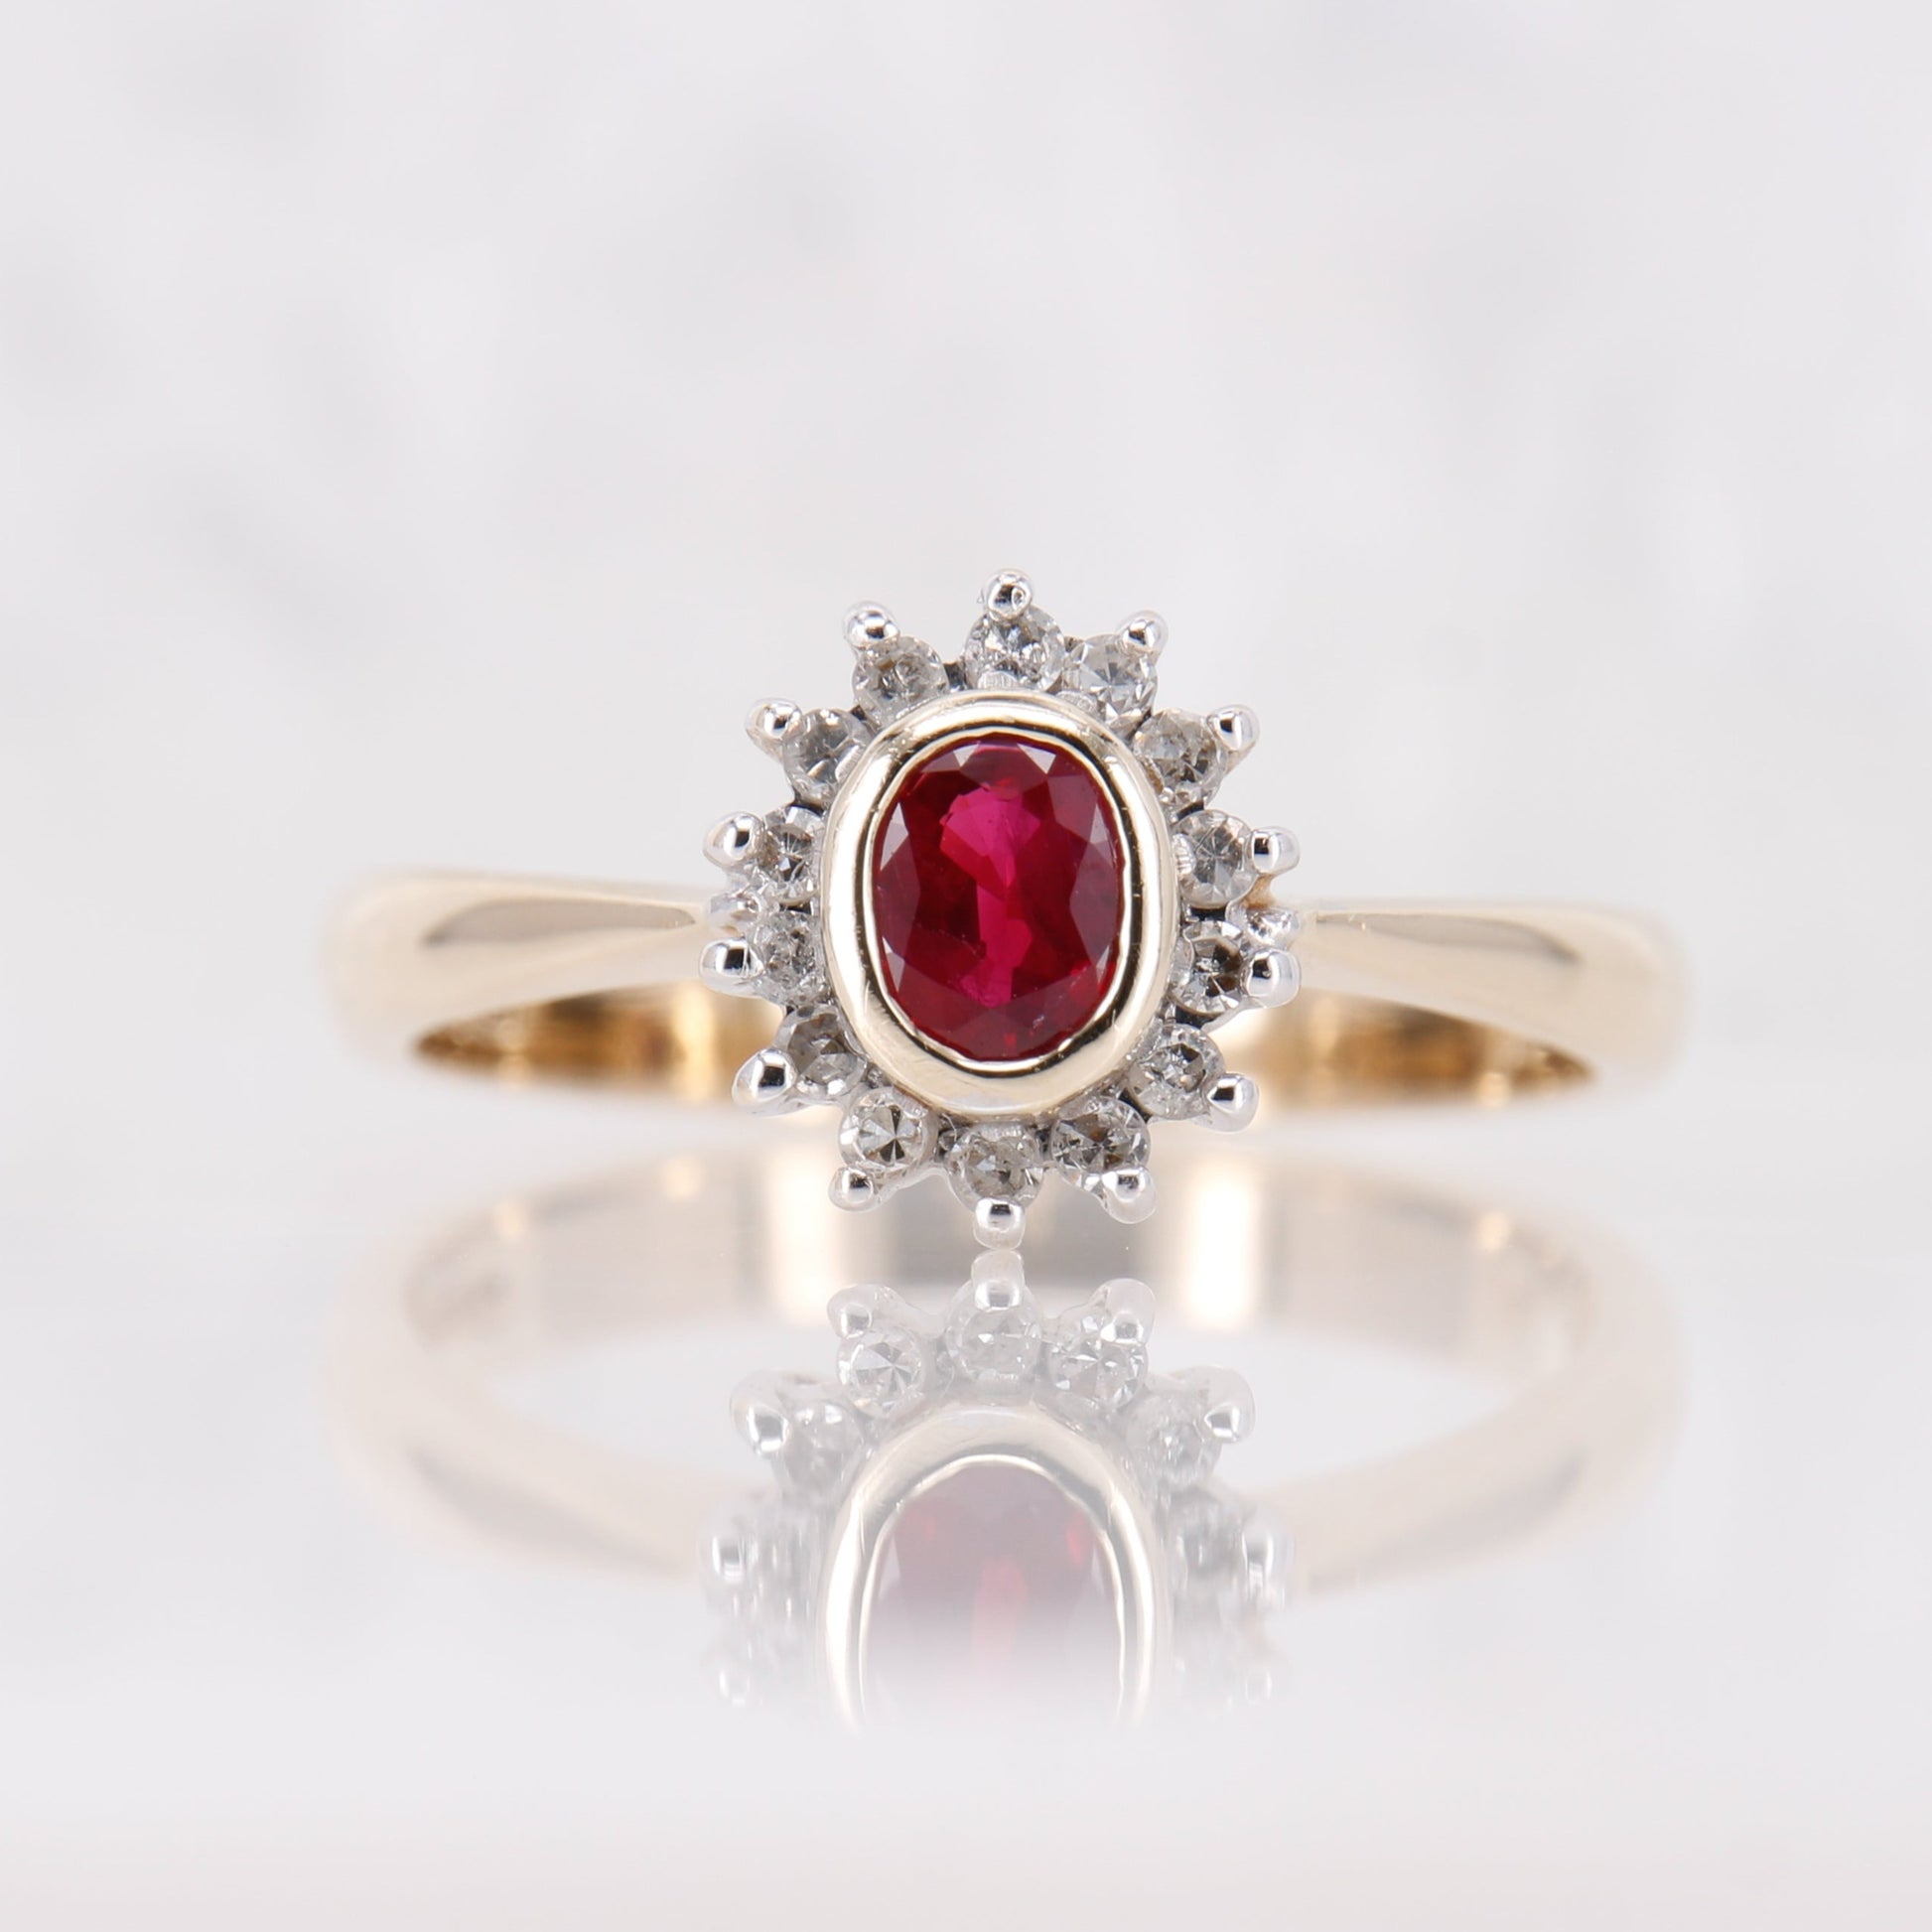 Vintage Garnet and Diamond Ring, Oval Cut Garnet surrounded by a halo of diamonds set in 9ct yellow gold. January birthstone engagement ring.